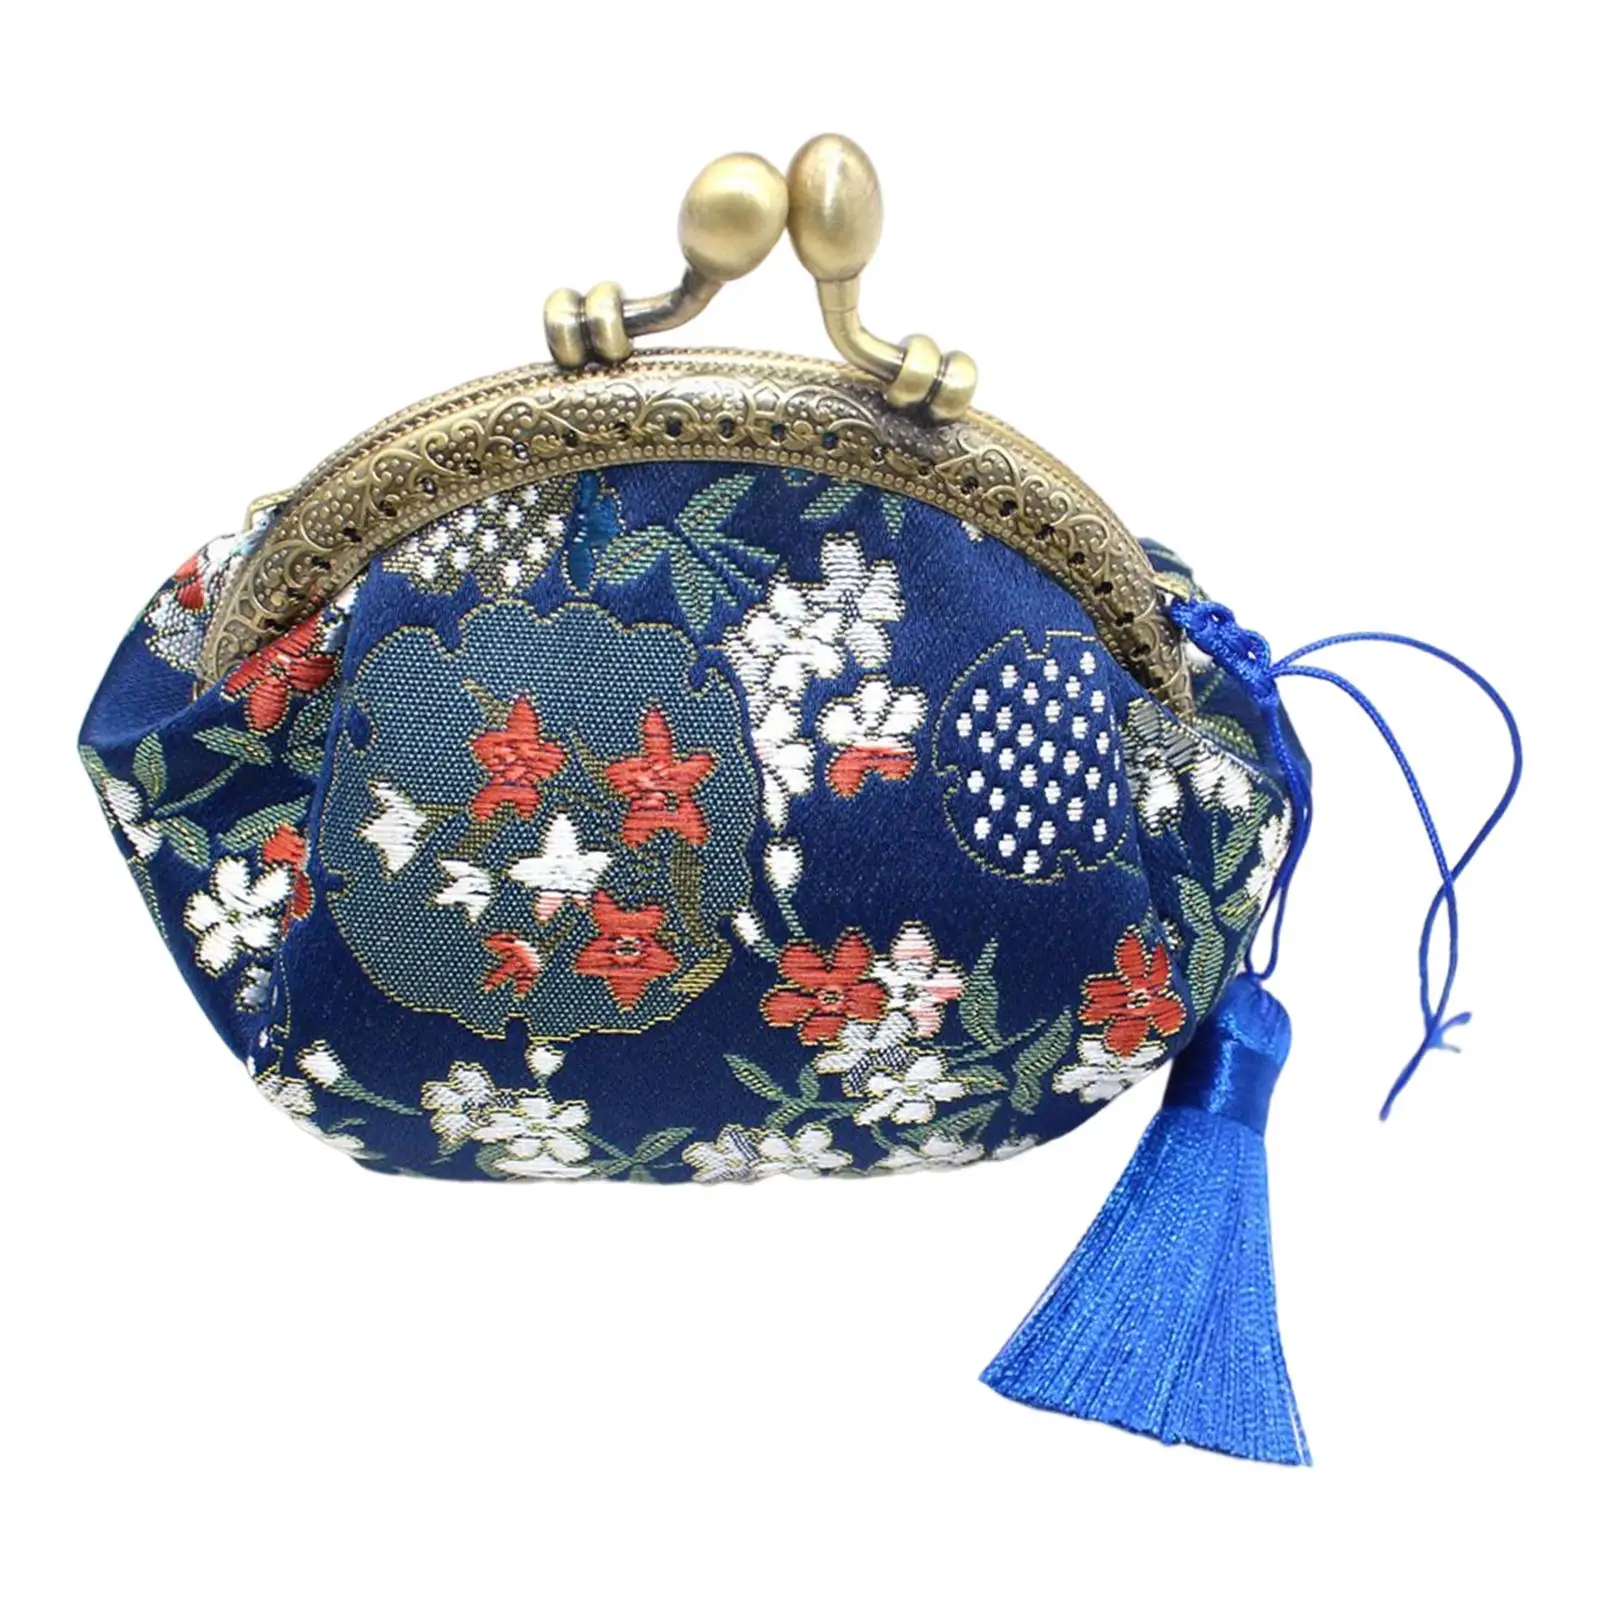 Small Coin Purse Kiss Lock Floral Change Holder Fashion Exquisite Wallet Handmade Embossed for Women Trinkets Storage Cash Gift